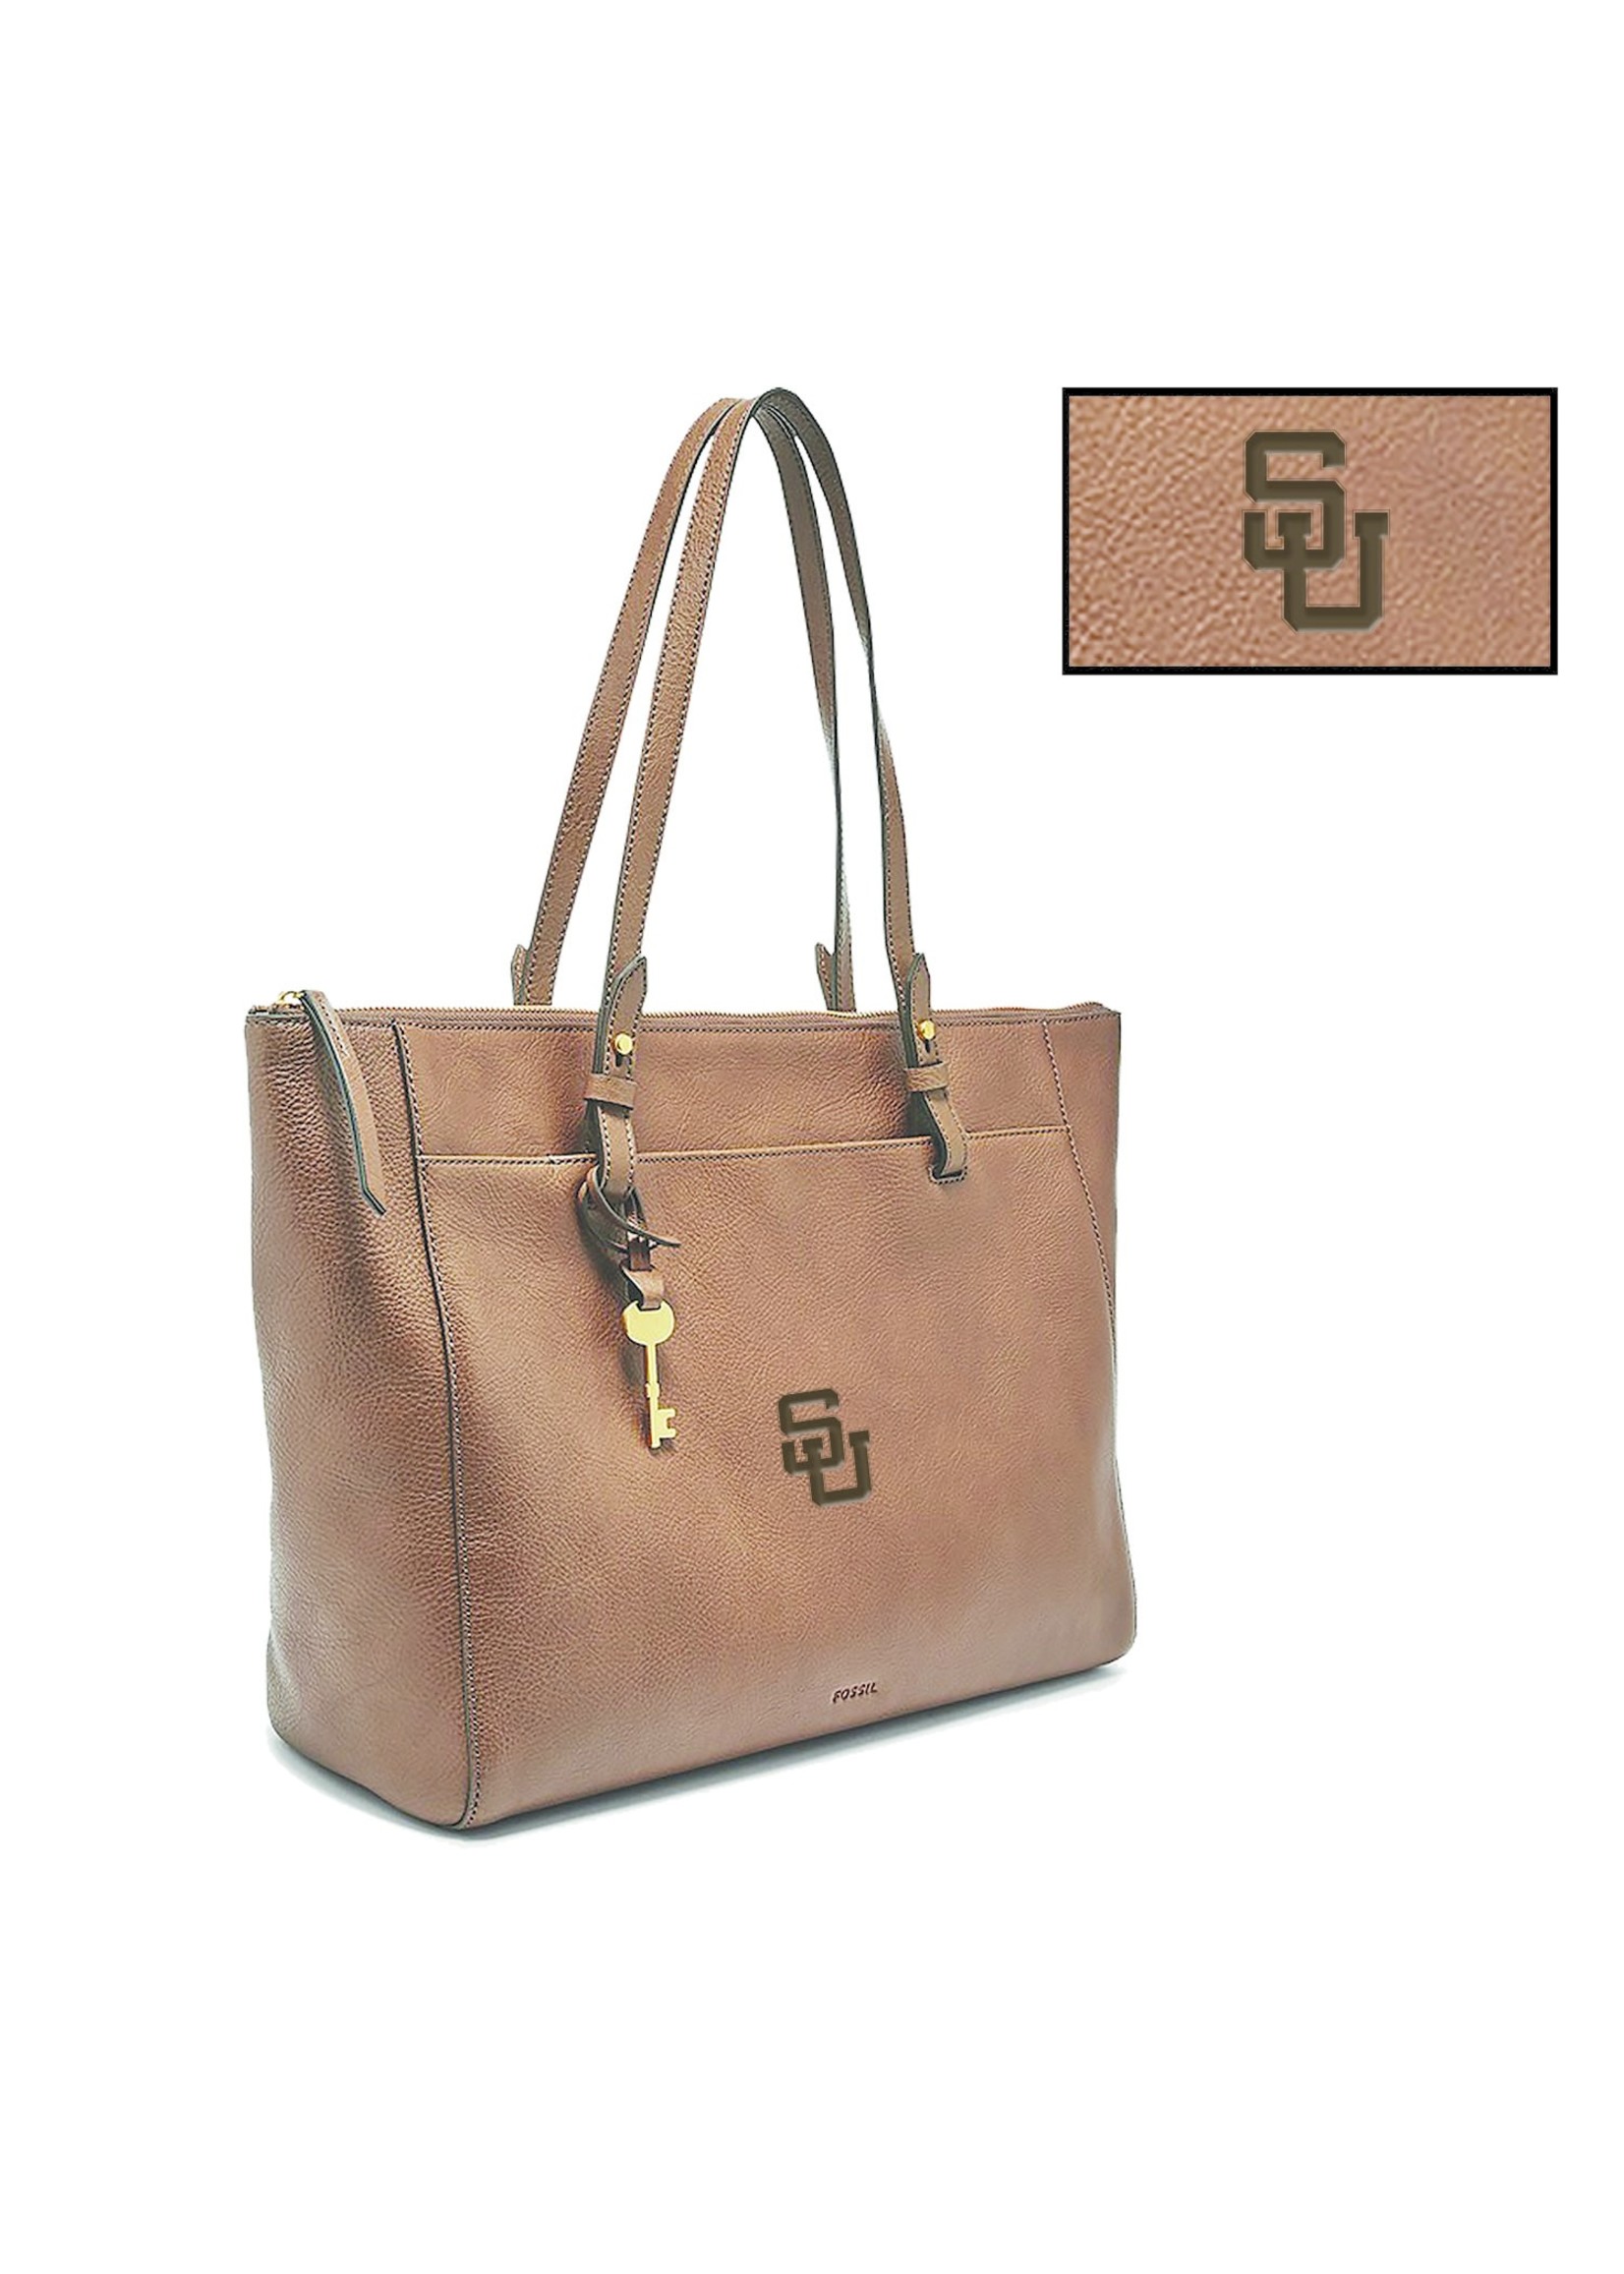 Fossil Fossil Rachel Tote - Brown